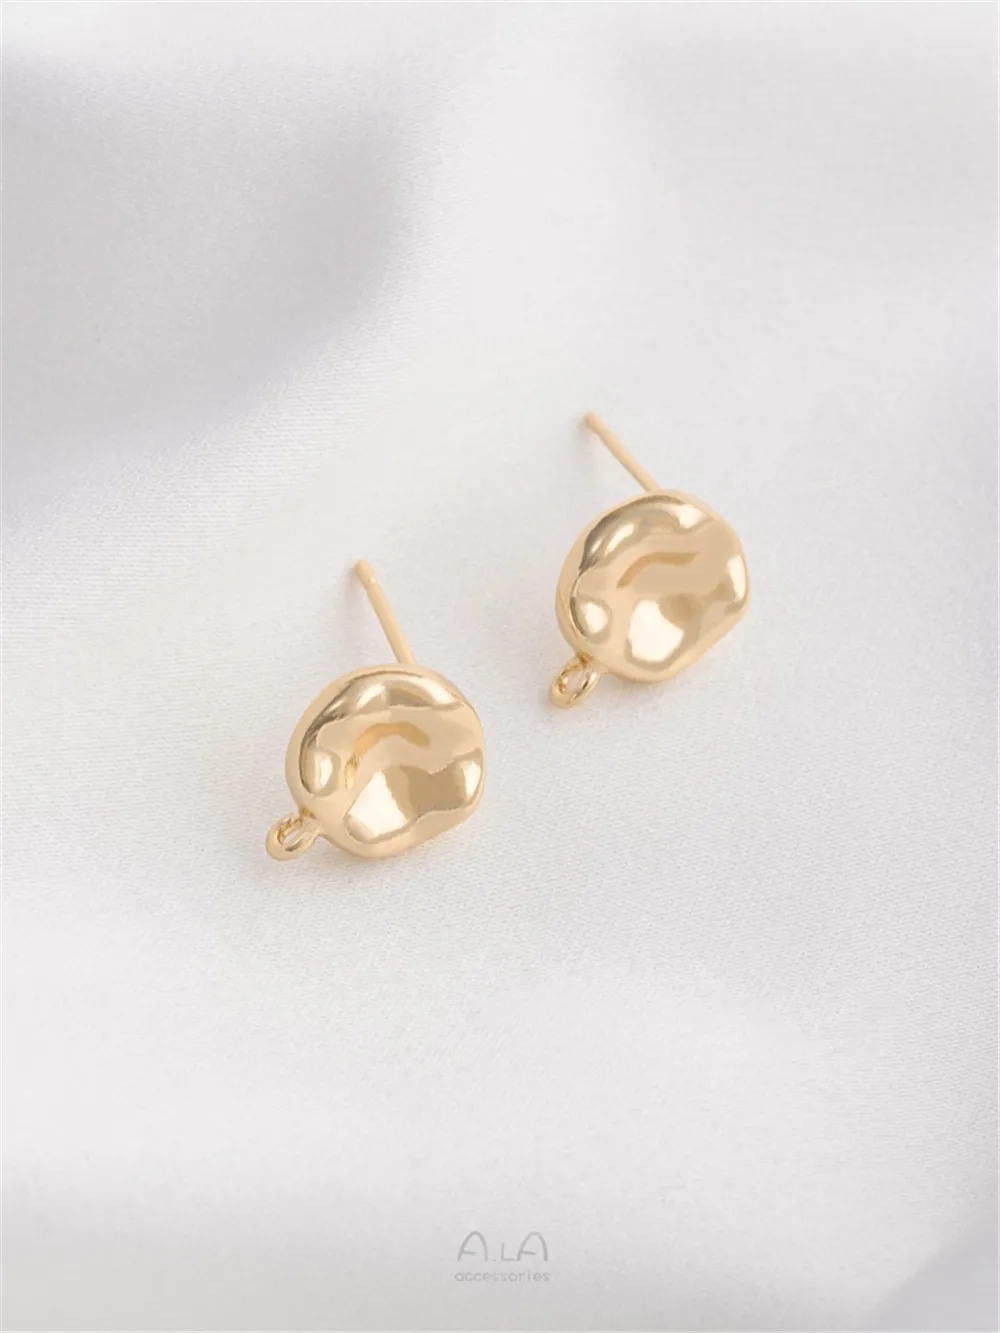 925 Silver Needle 14K Gold Wrapped Lava Small Stone Irregular Flat Round Square with Hanging Rings Earrings Accessories E345